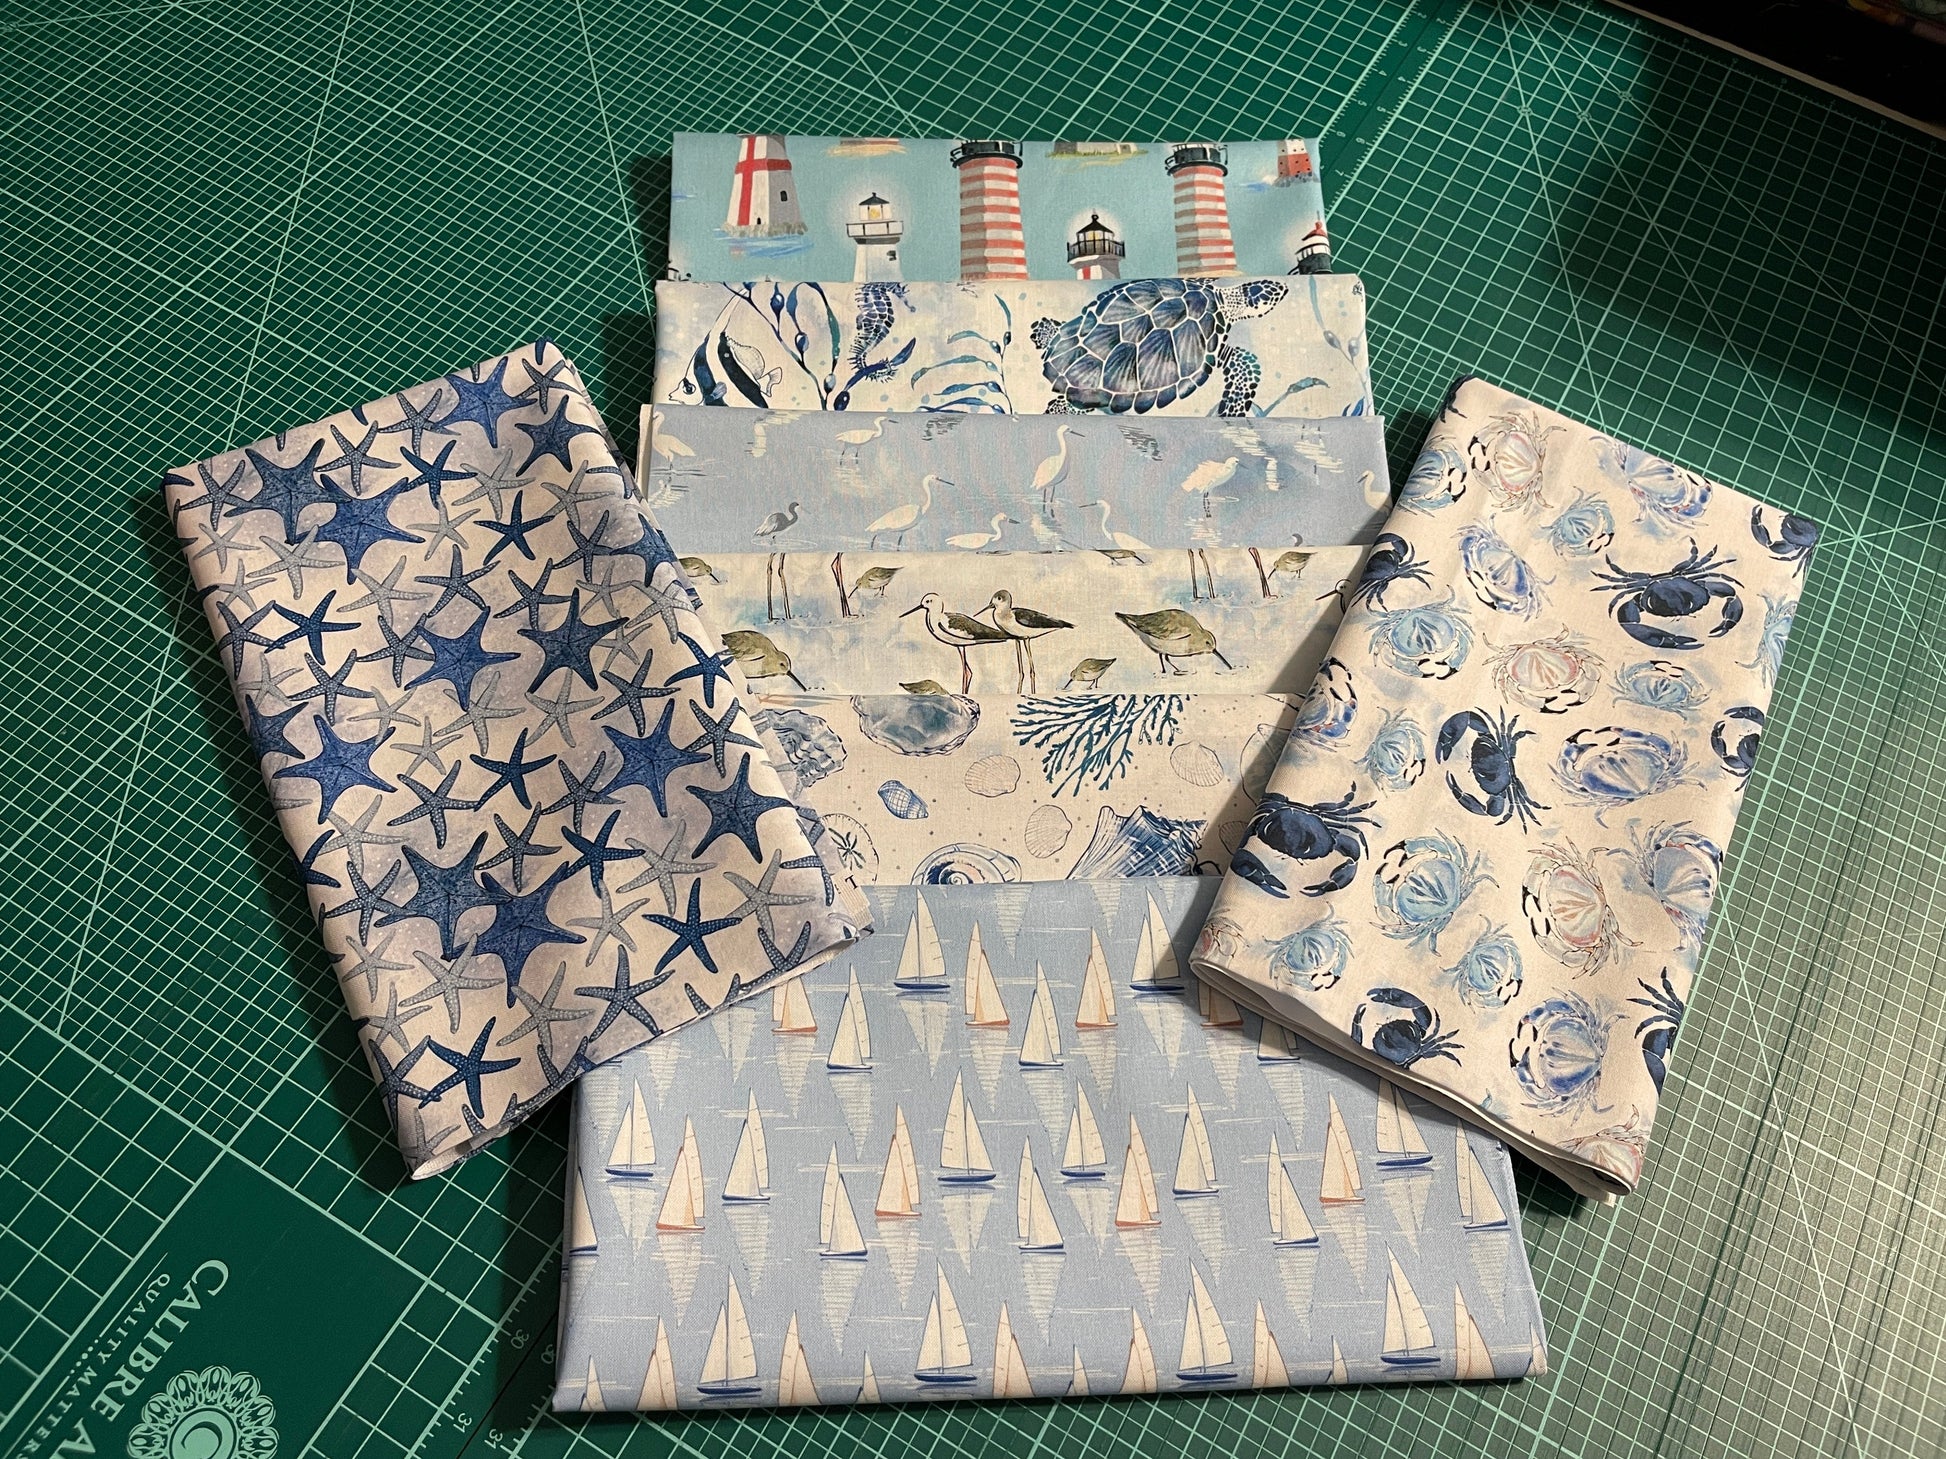 Timeless Treasures Fabric Bundle Thomas Little Ocean Blue Beach Fabric & Nautical Fabric FQ Bundle with Beach Dreams Panel (8 FQ pieces and 1 panel)